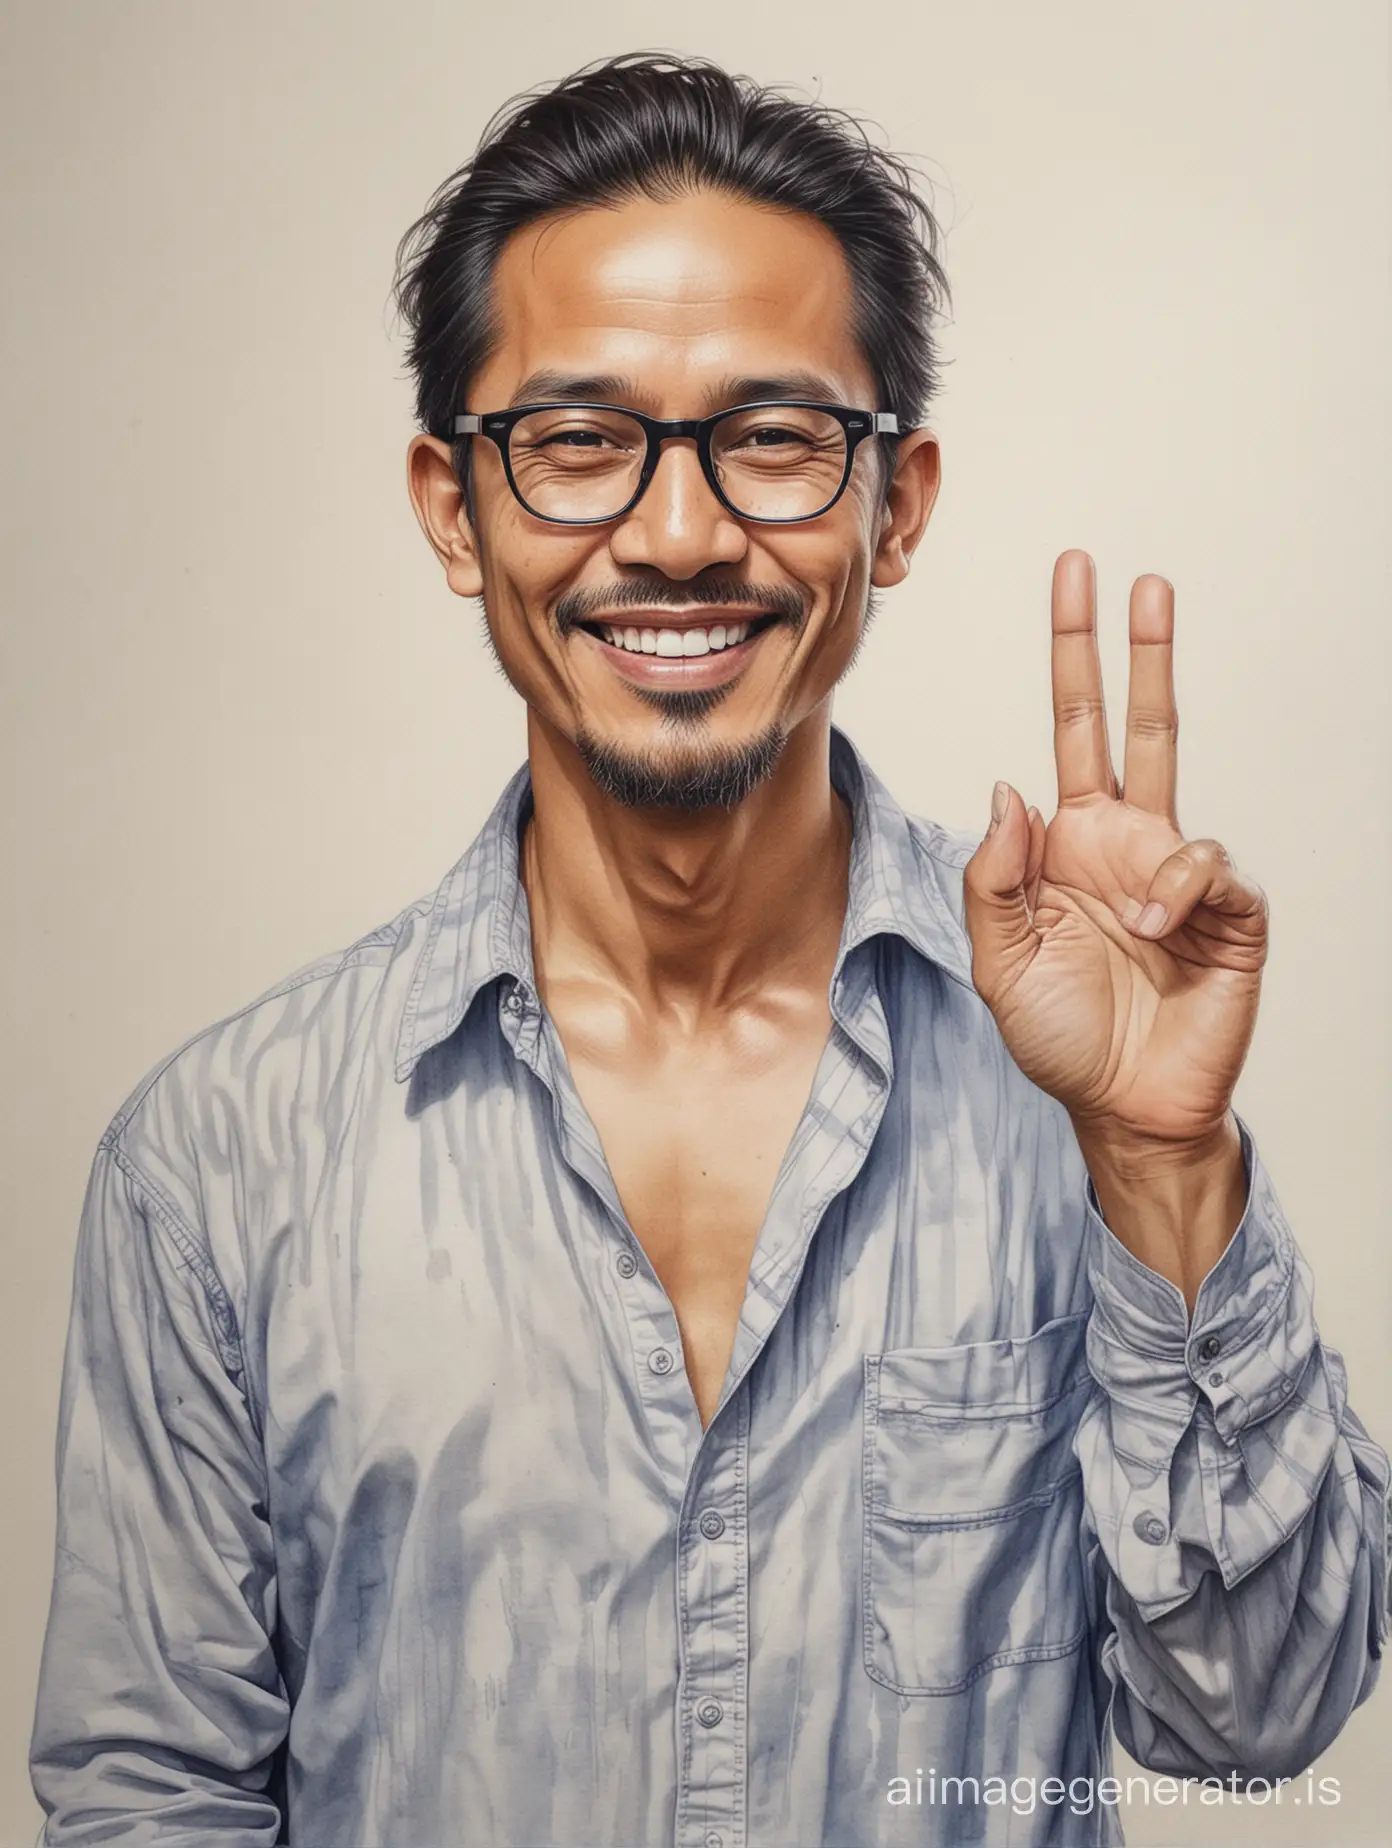 Realistic drawing, watercolor painting, rough line sketch, produces an Indonesian man, 50 years old, thin face, clean face, long hair tied back, wearing bold frame wayfarer glasses,wearing an unbuttoned t-shirt and flannel shirt, standing on the right side smiling, making the namaste hand gesture at  front of his chest.  To the left of the man there is typography that says "EID MUBARAK" which is clearly legible, Ramadan design background, detailed image, detailed visuals, looks real, HD